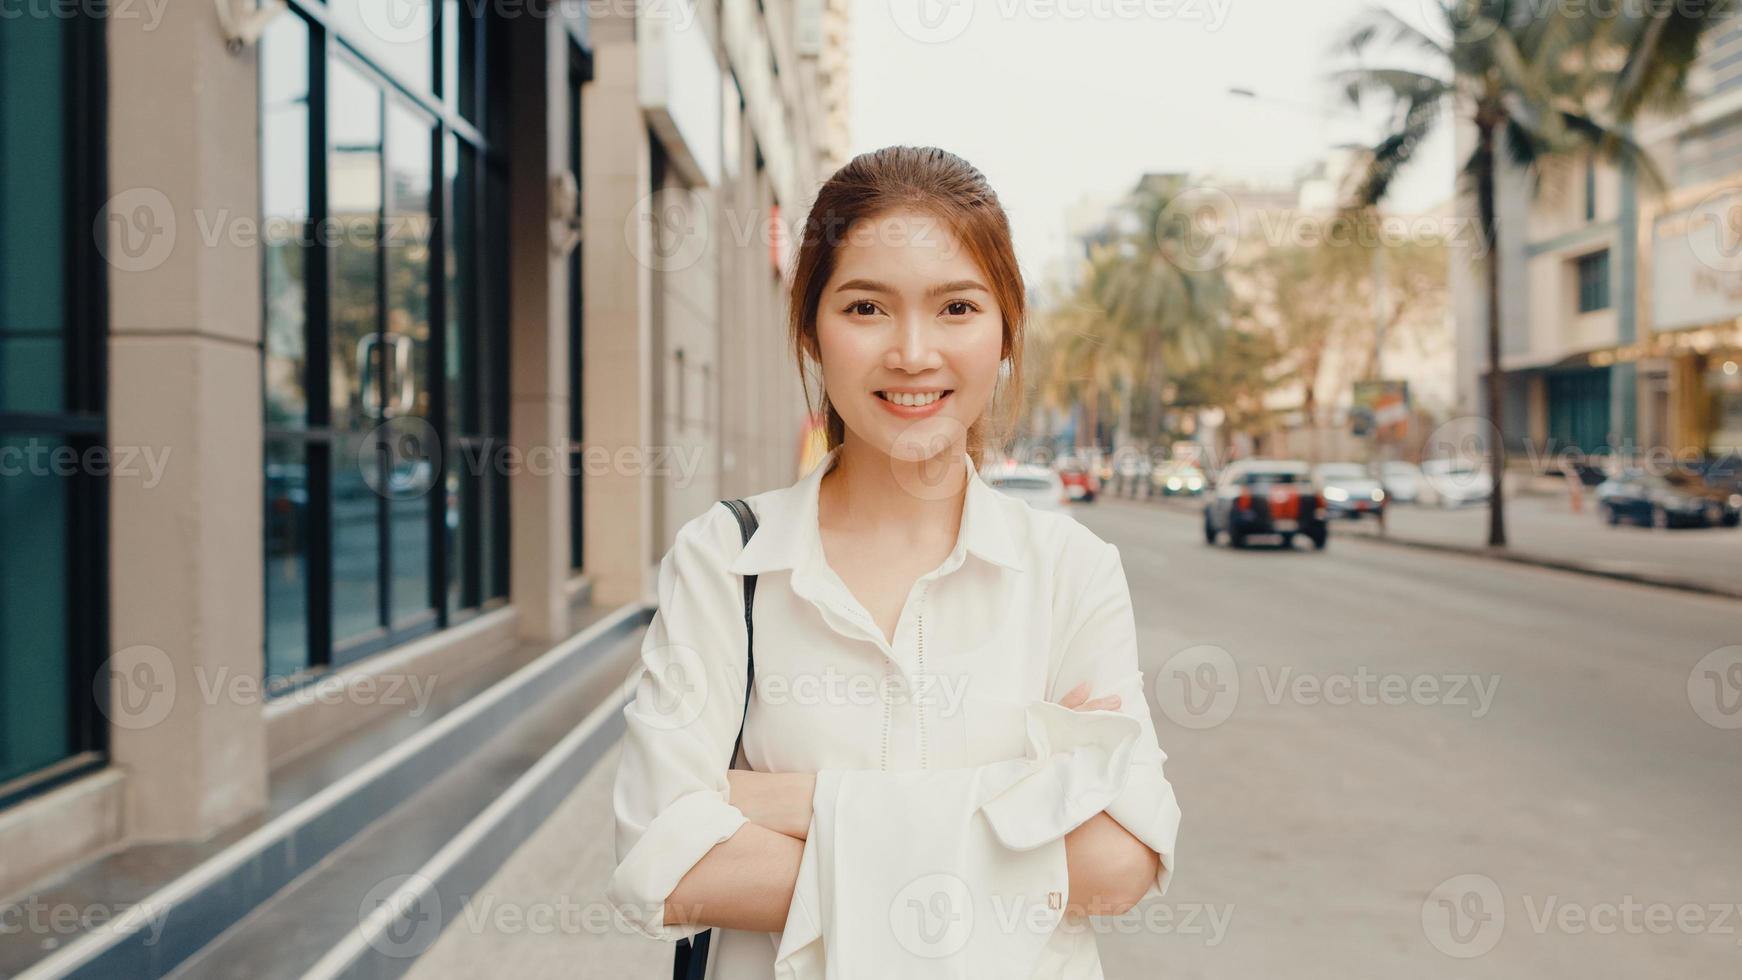 Successful young Asia businesswoman in fashion office clothes smiling and looking at camera while happy standing alone outdoors in urban modern city in the morning. Business on the go concept. photo